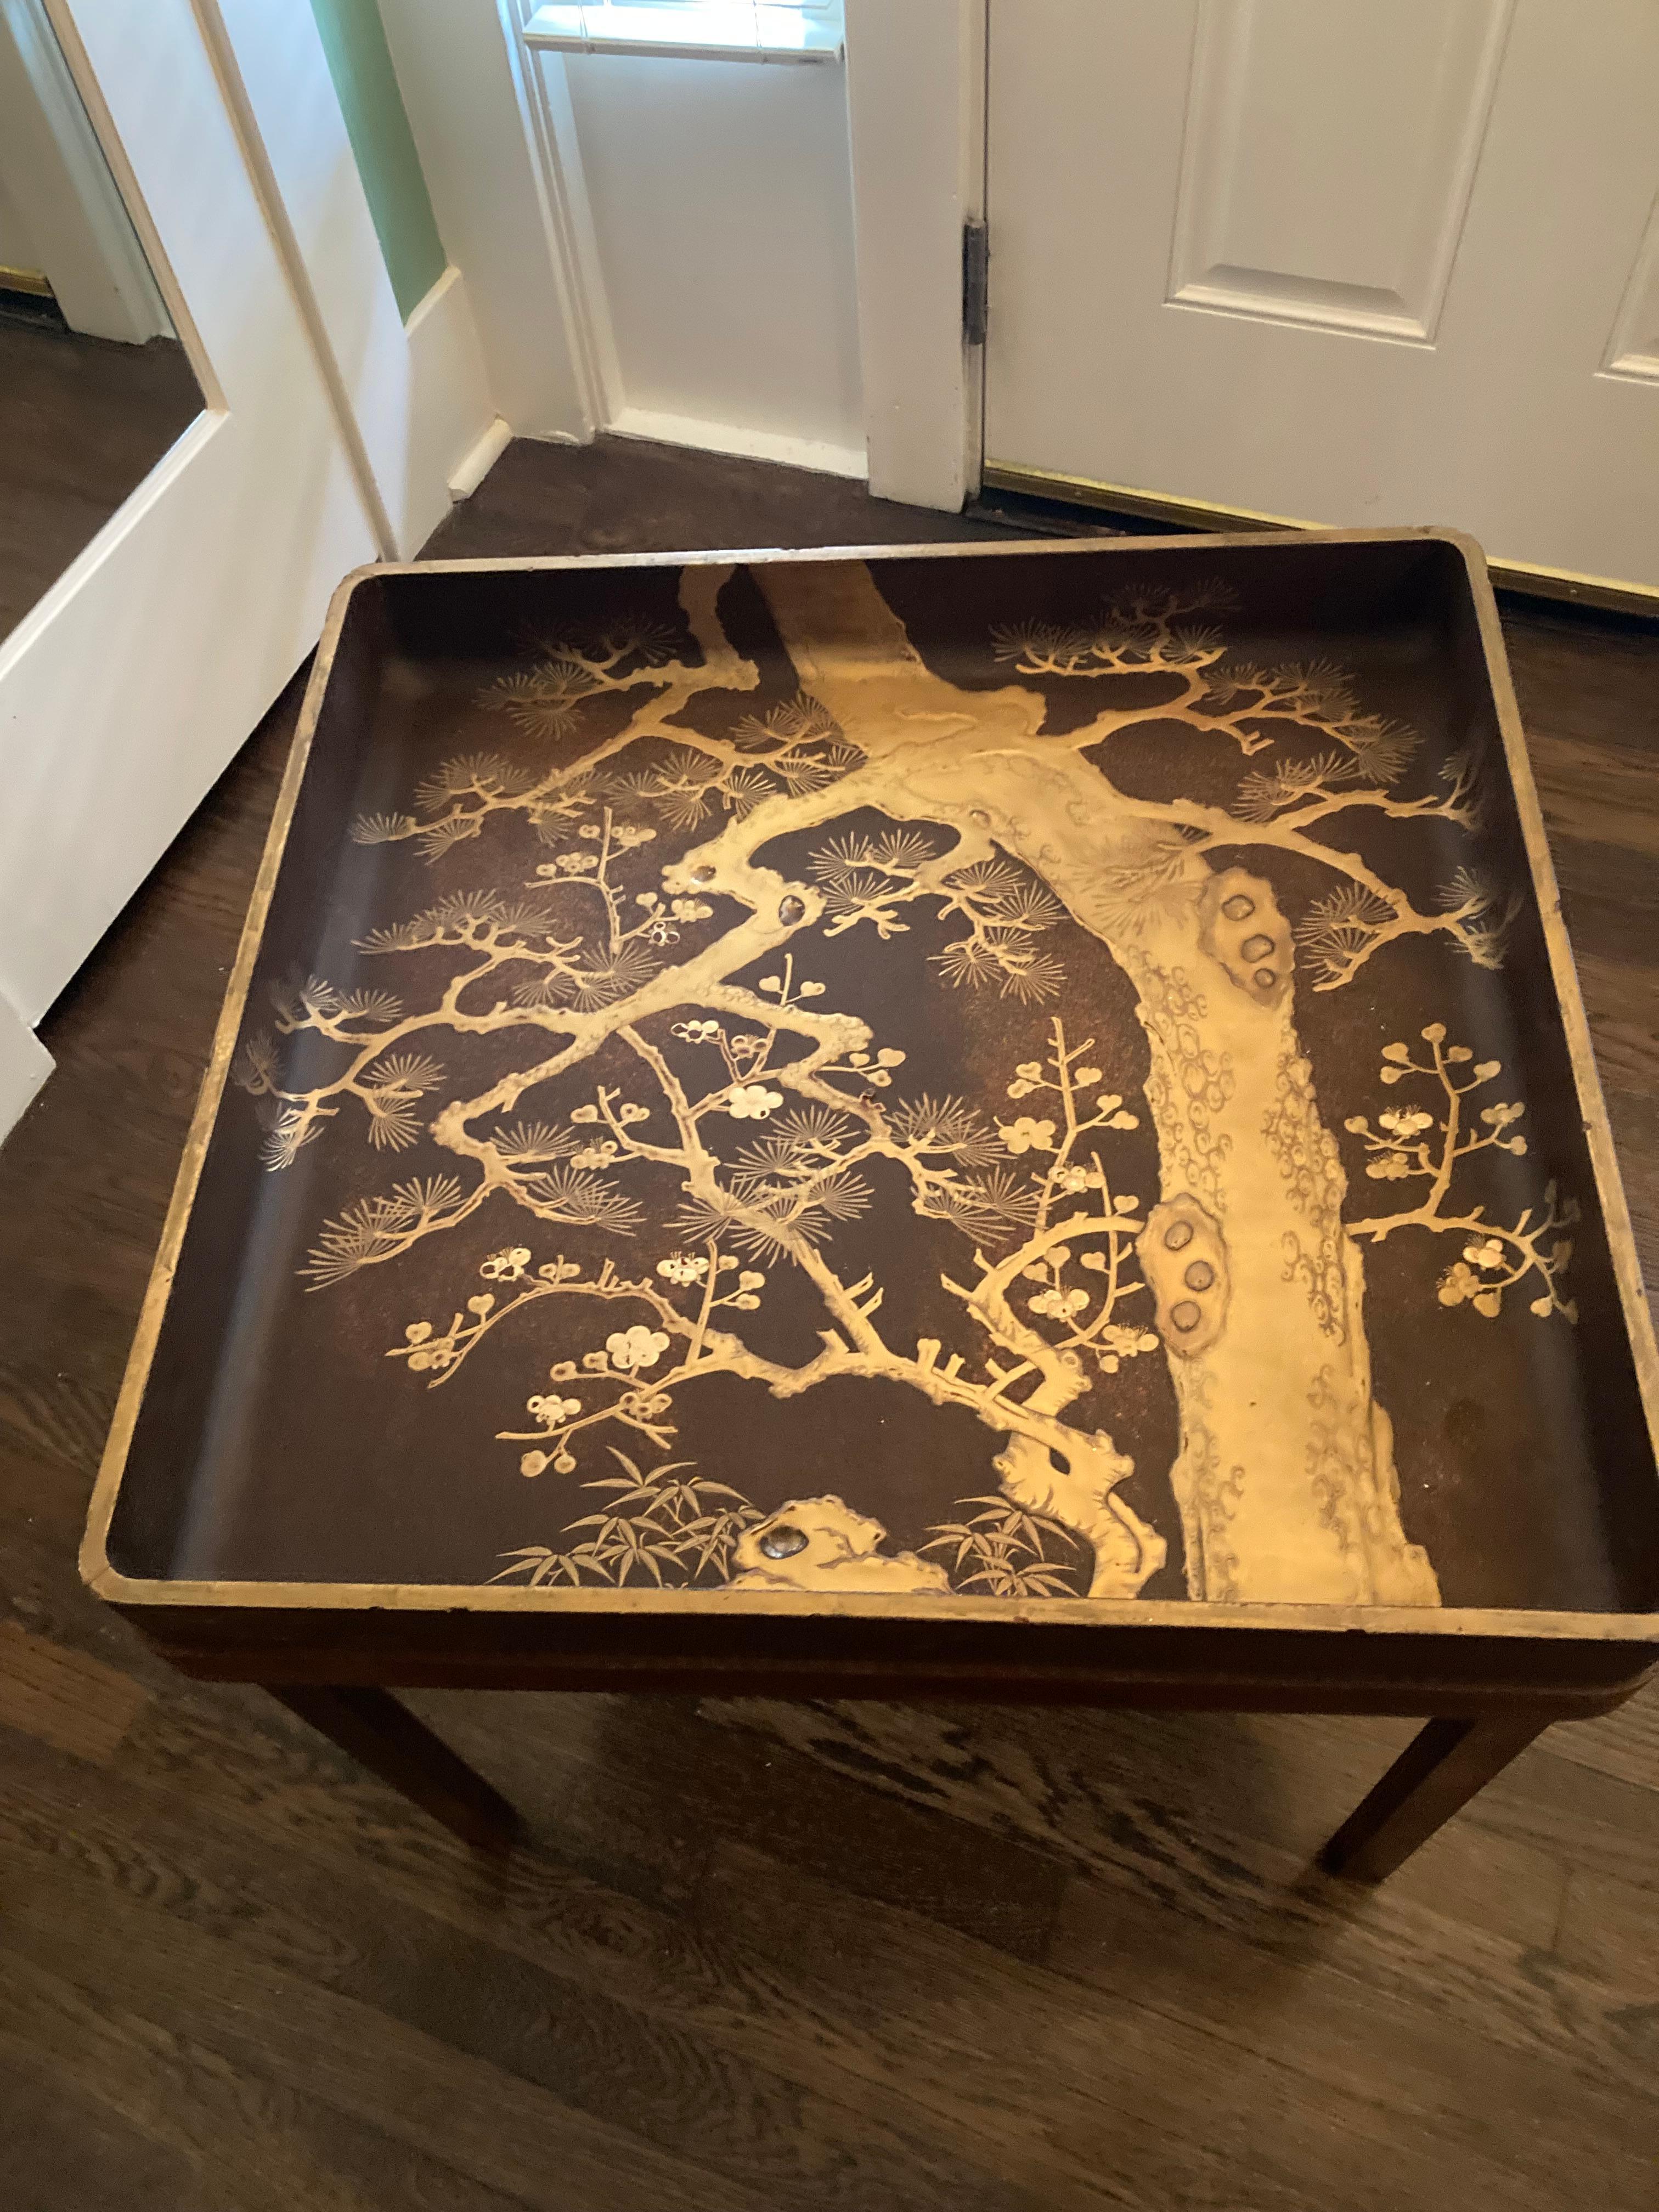 Early 20th Century Japanese Lacquer Tray Table In Good Condition For Sale In Tacoma, WA